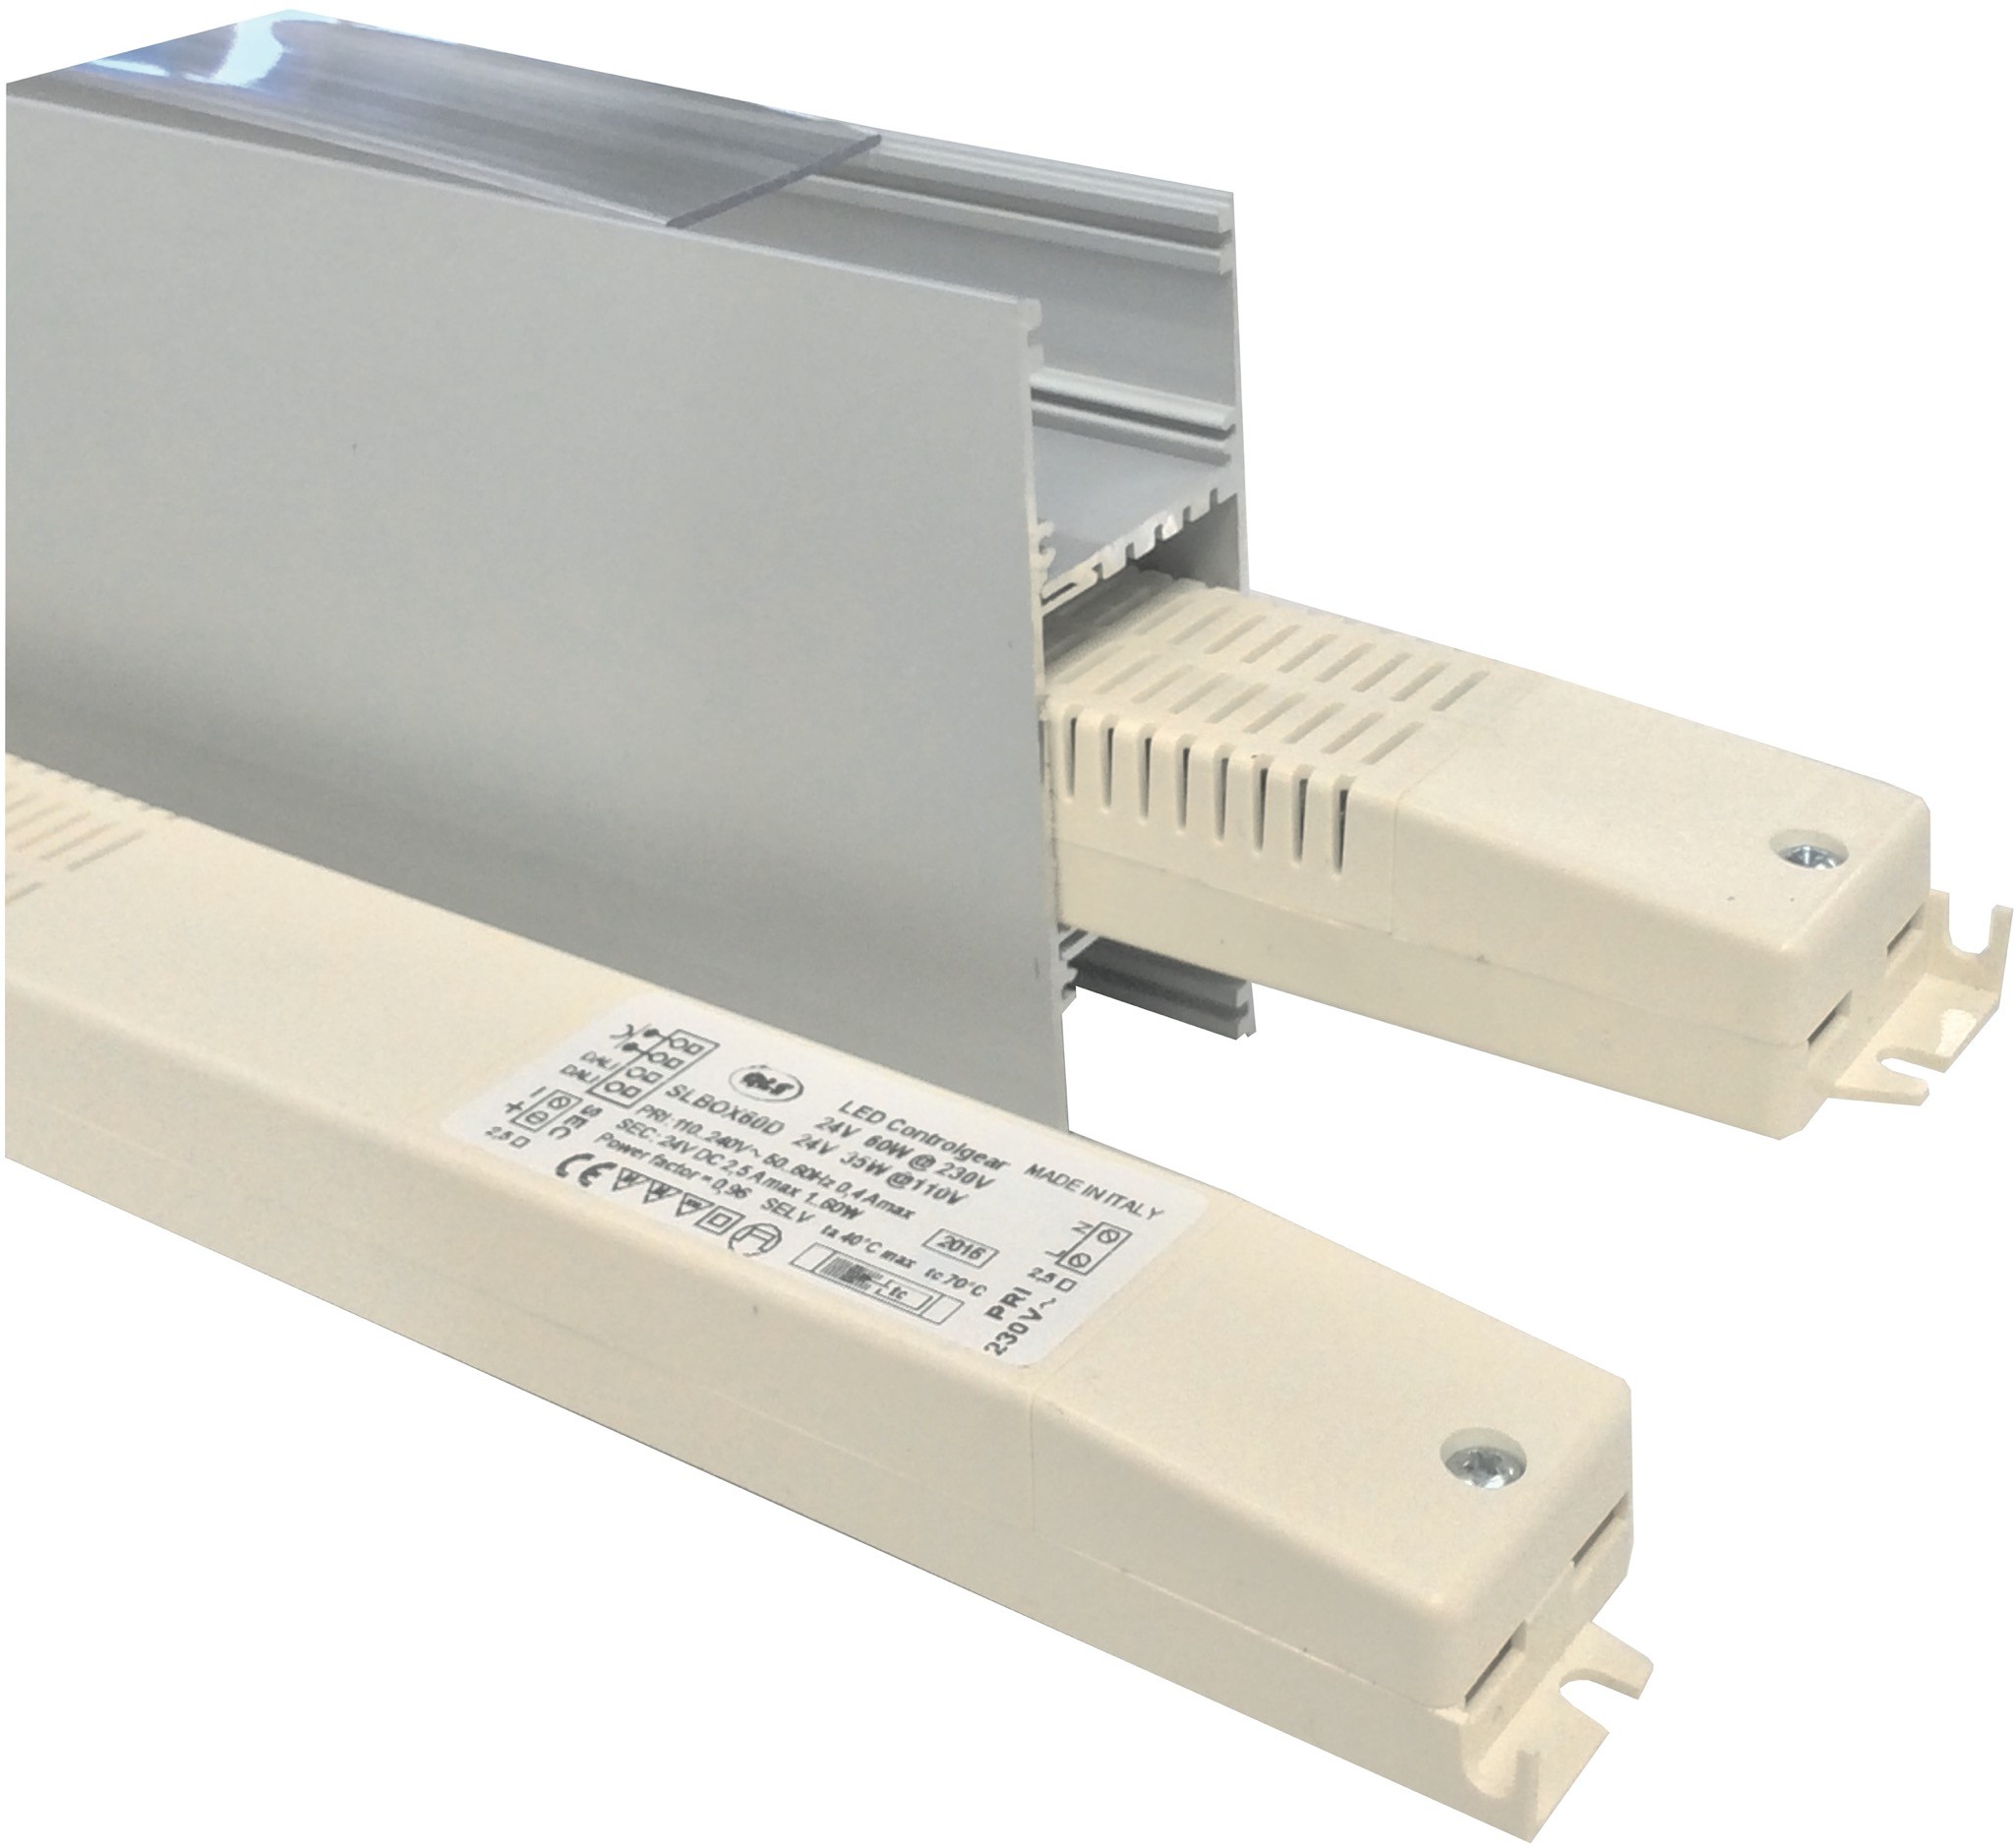 SLIMBOX60 1-10V DIMMABLE - QLT - Qualitron Led Solutions